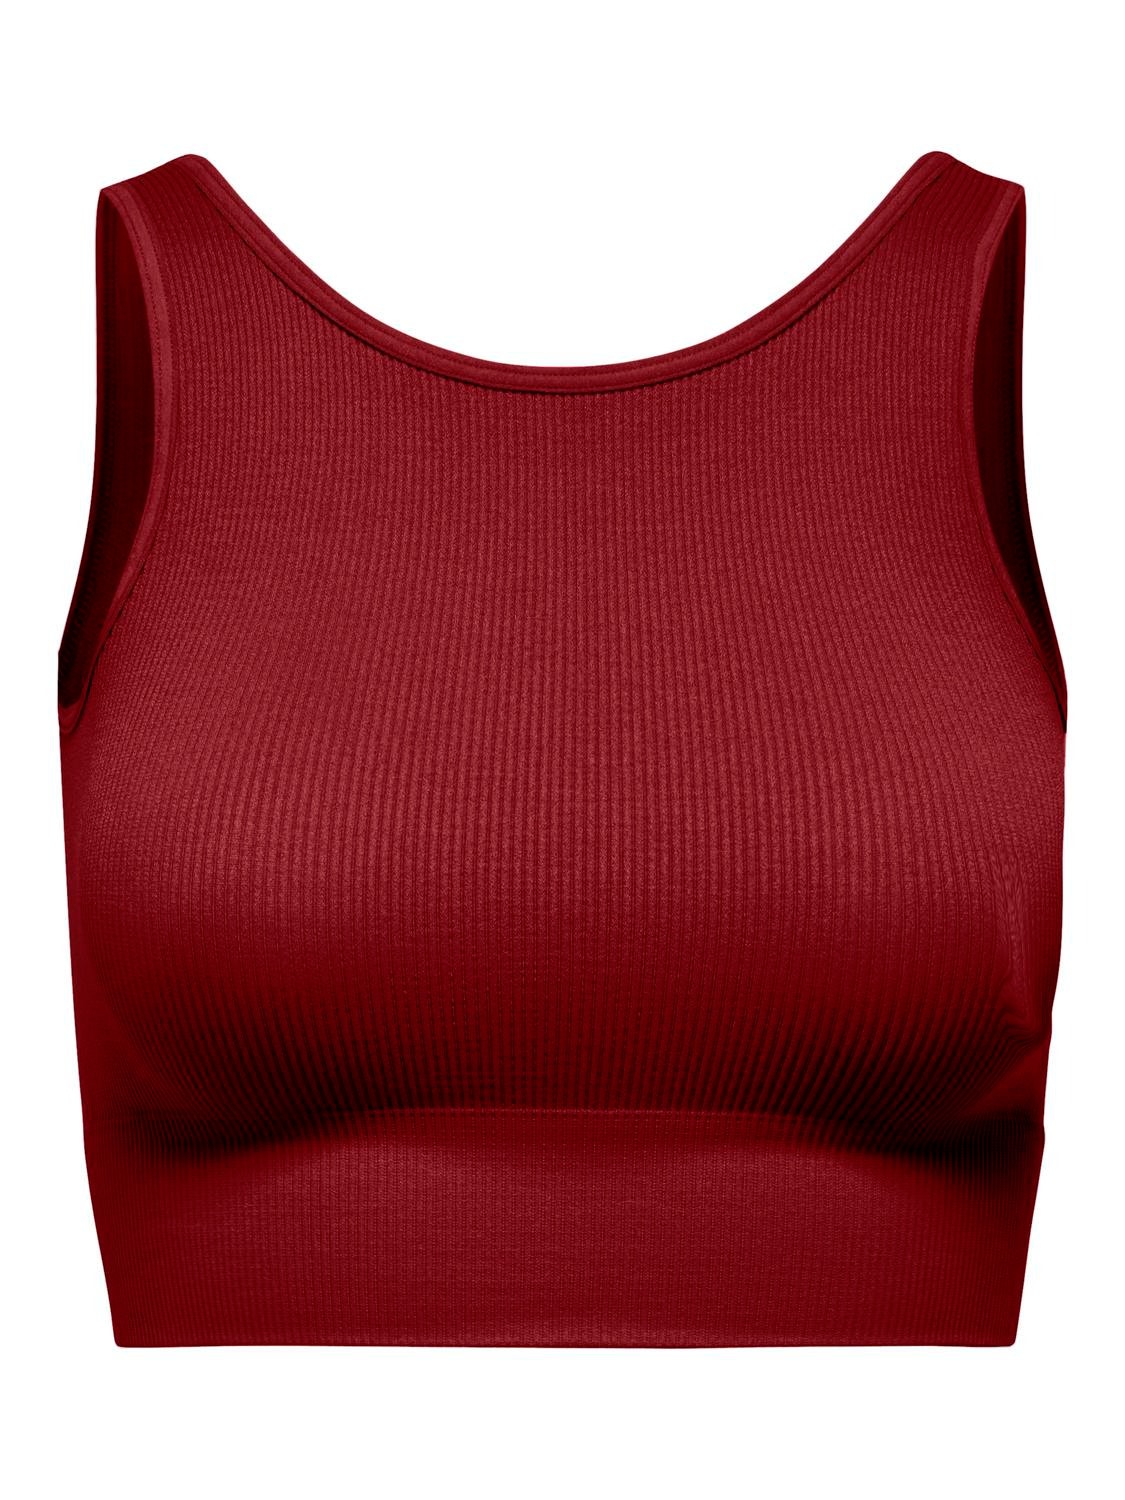 ONLY Seamless Training Top -Sun-Dried Tomato - 15250051